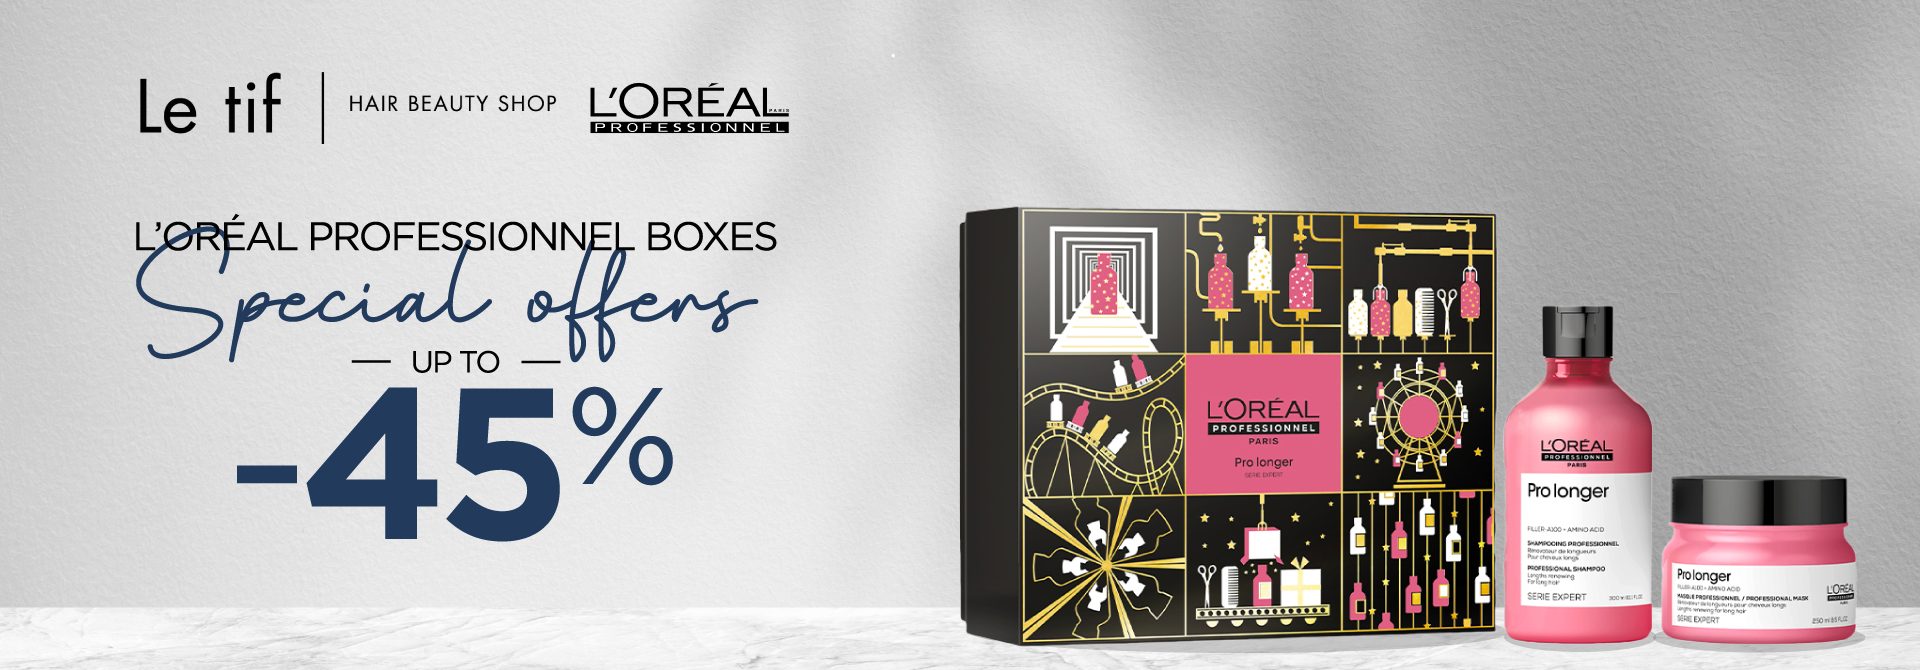 loreal boxes -40% brand right